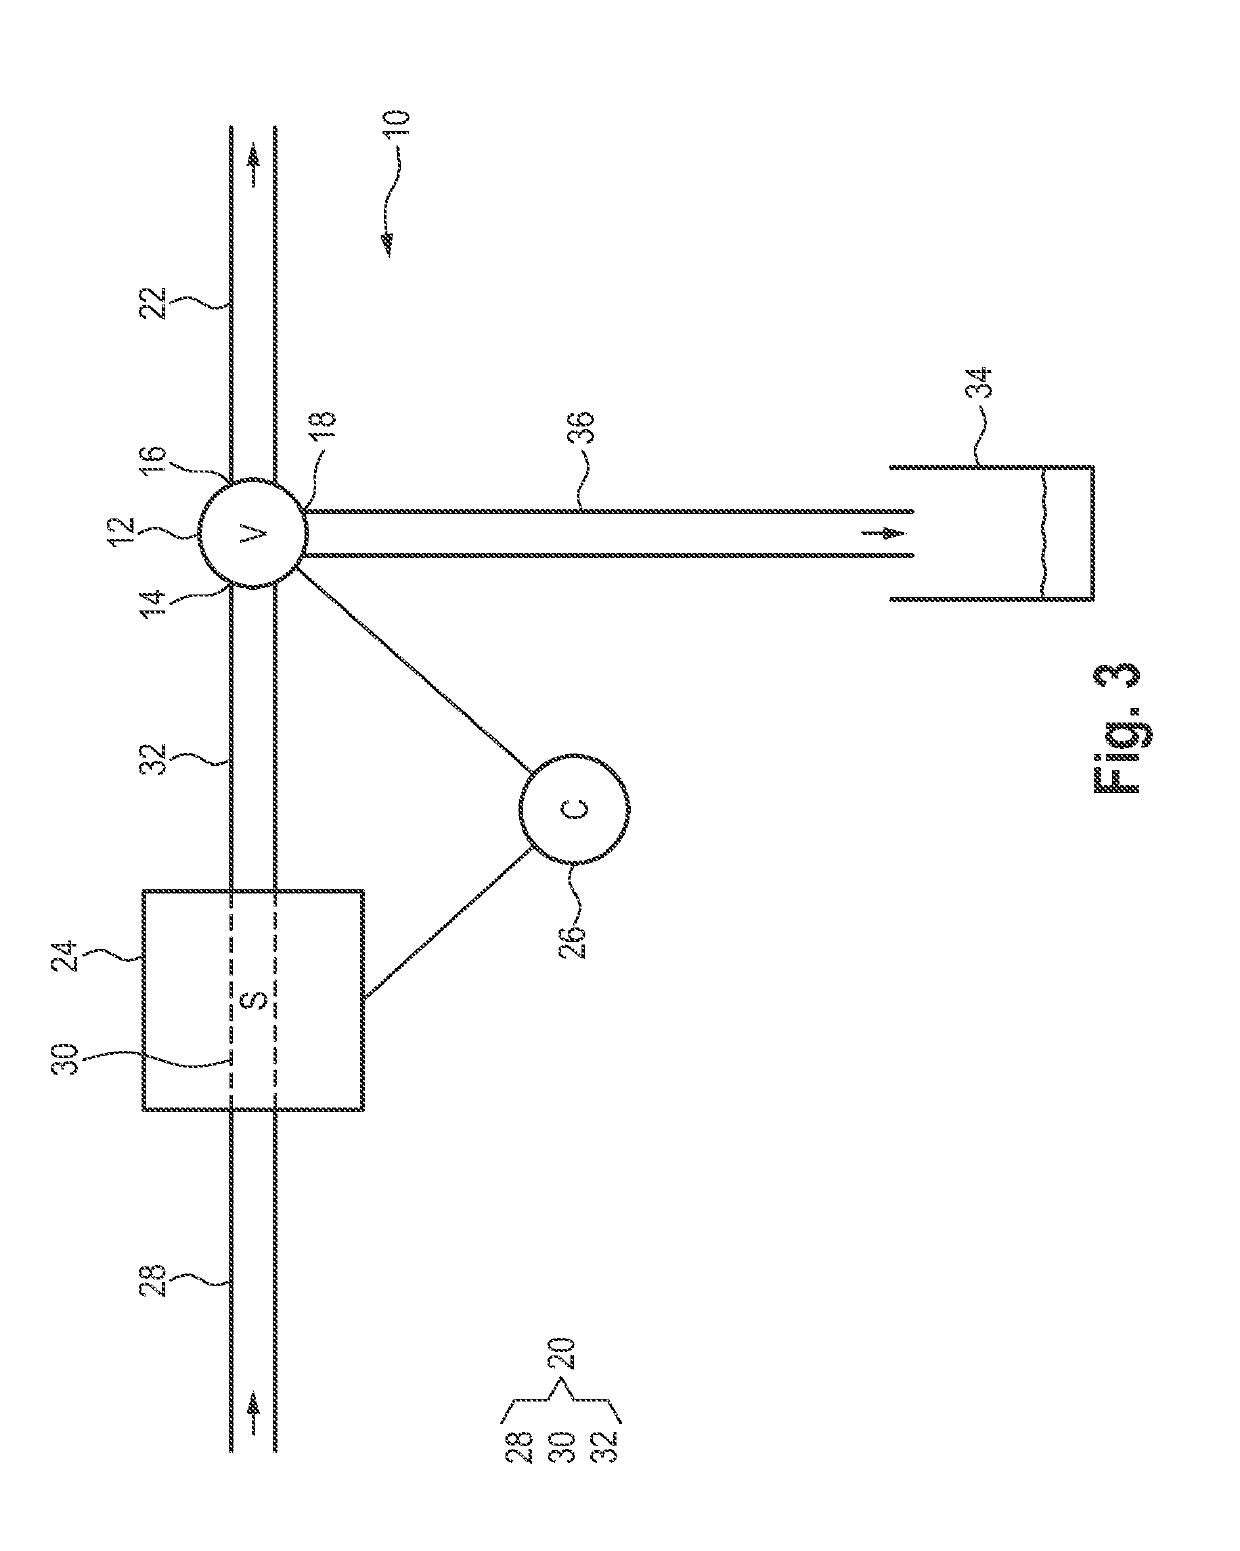 Fluid supply assembly for removing gas bubbles from a fluid path